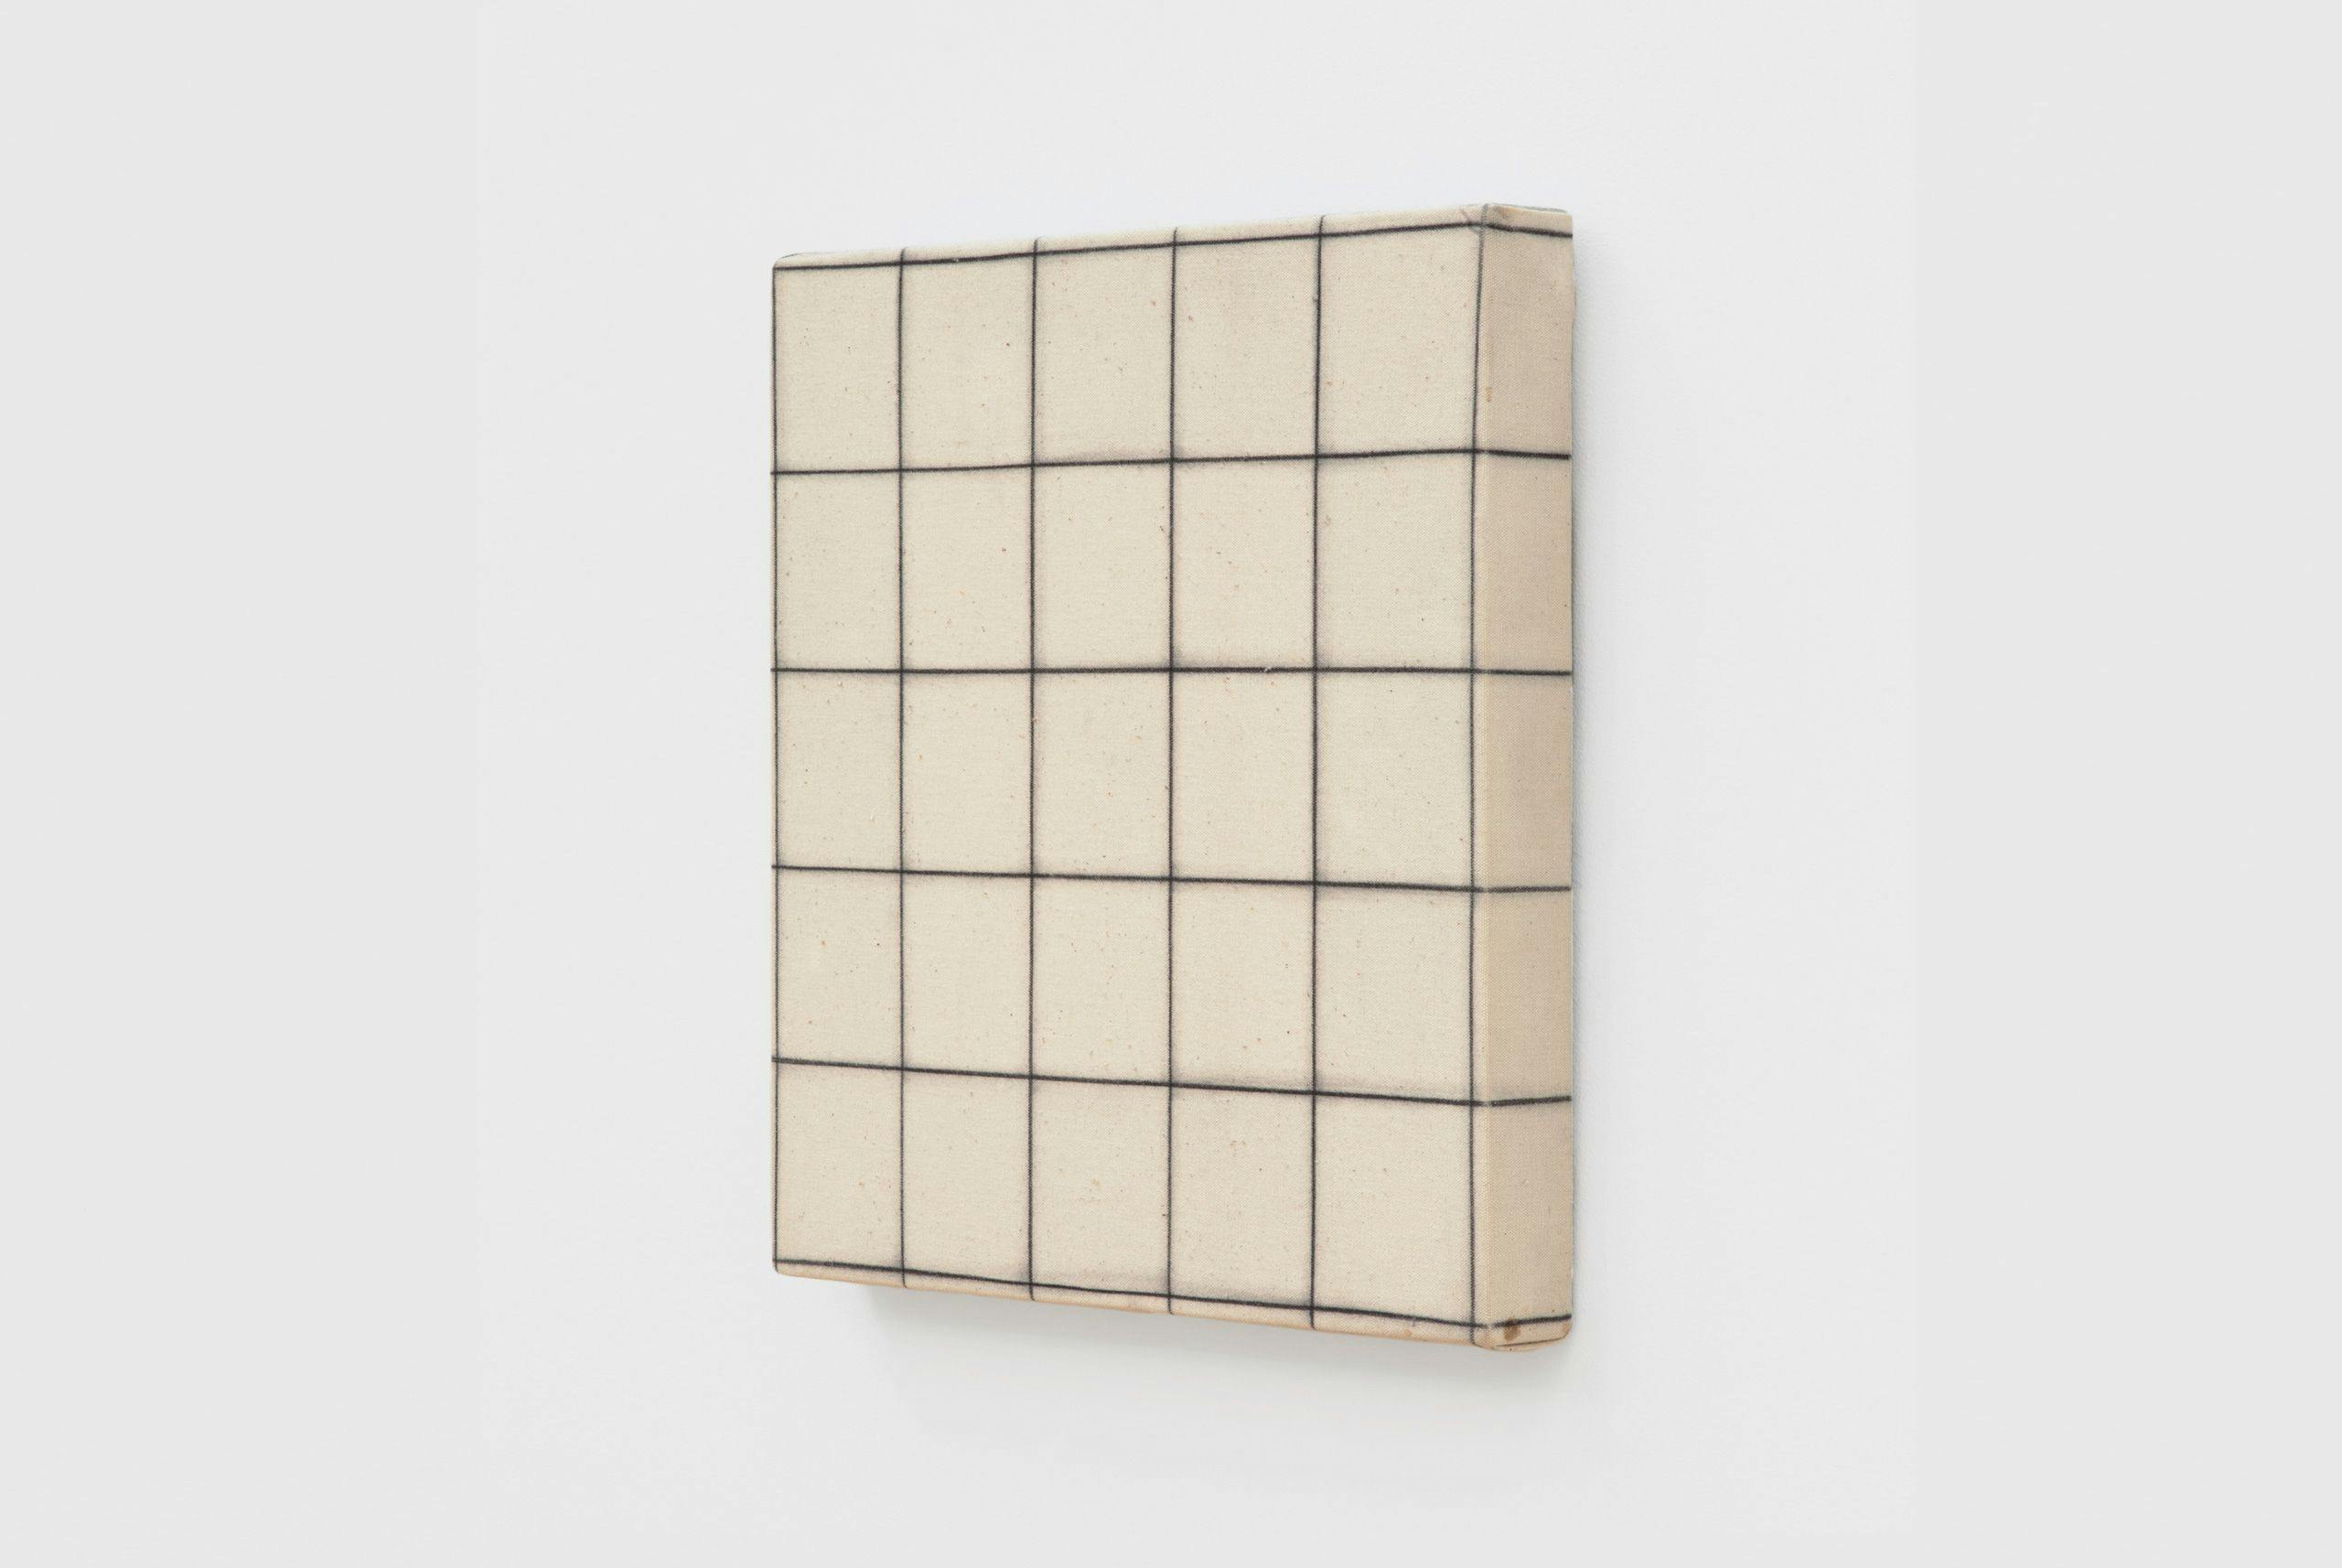 A charcoal drawing by Robert Ryman titled Stretched Drawing [5 × 5 grid], dated 1963